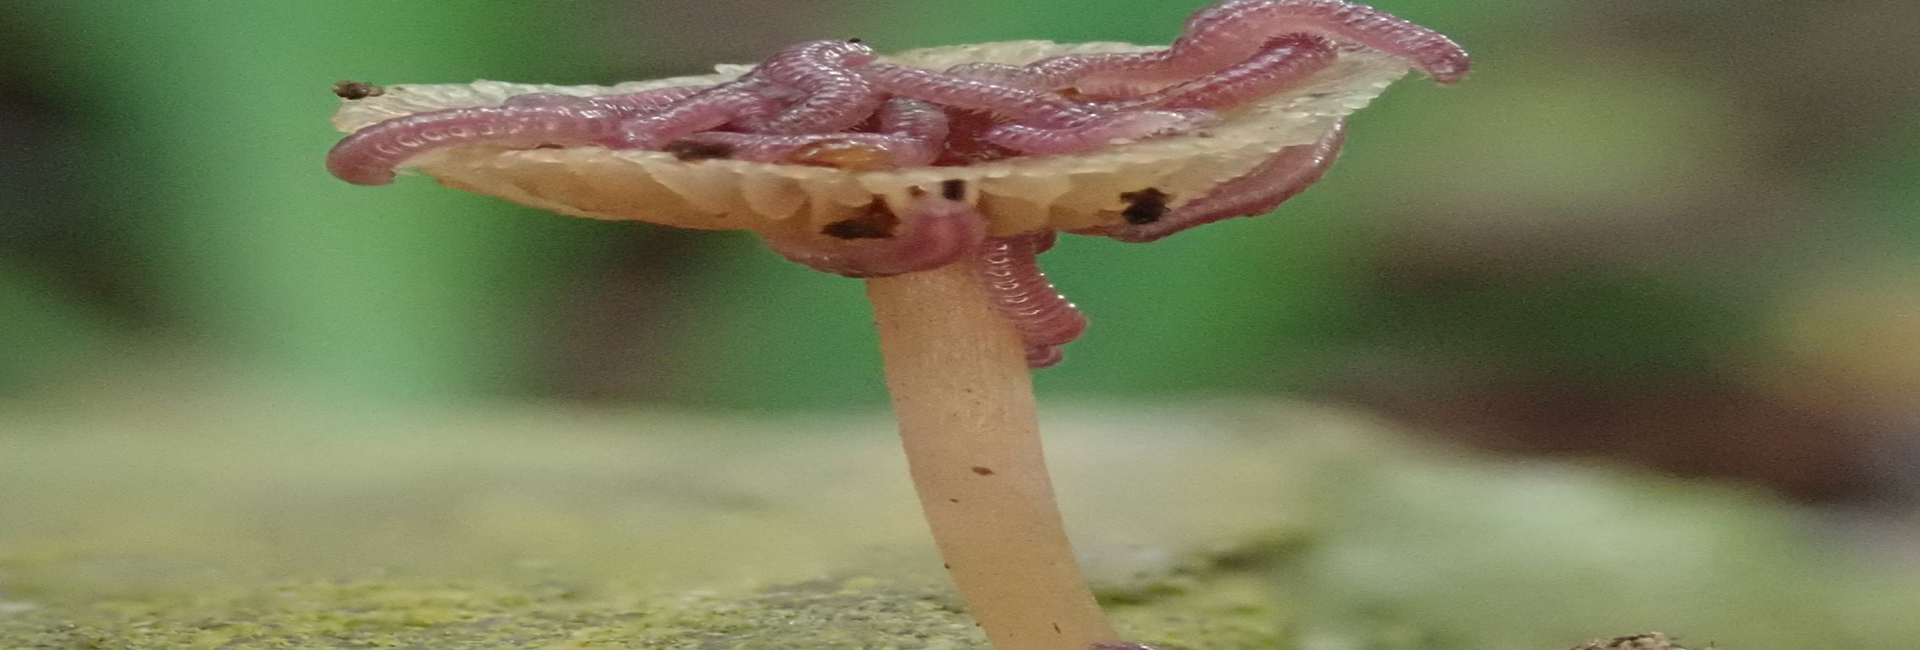 A mushroom with centipedes 